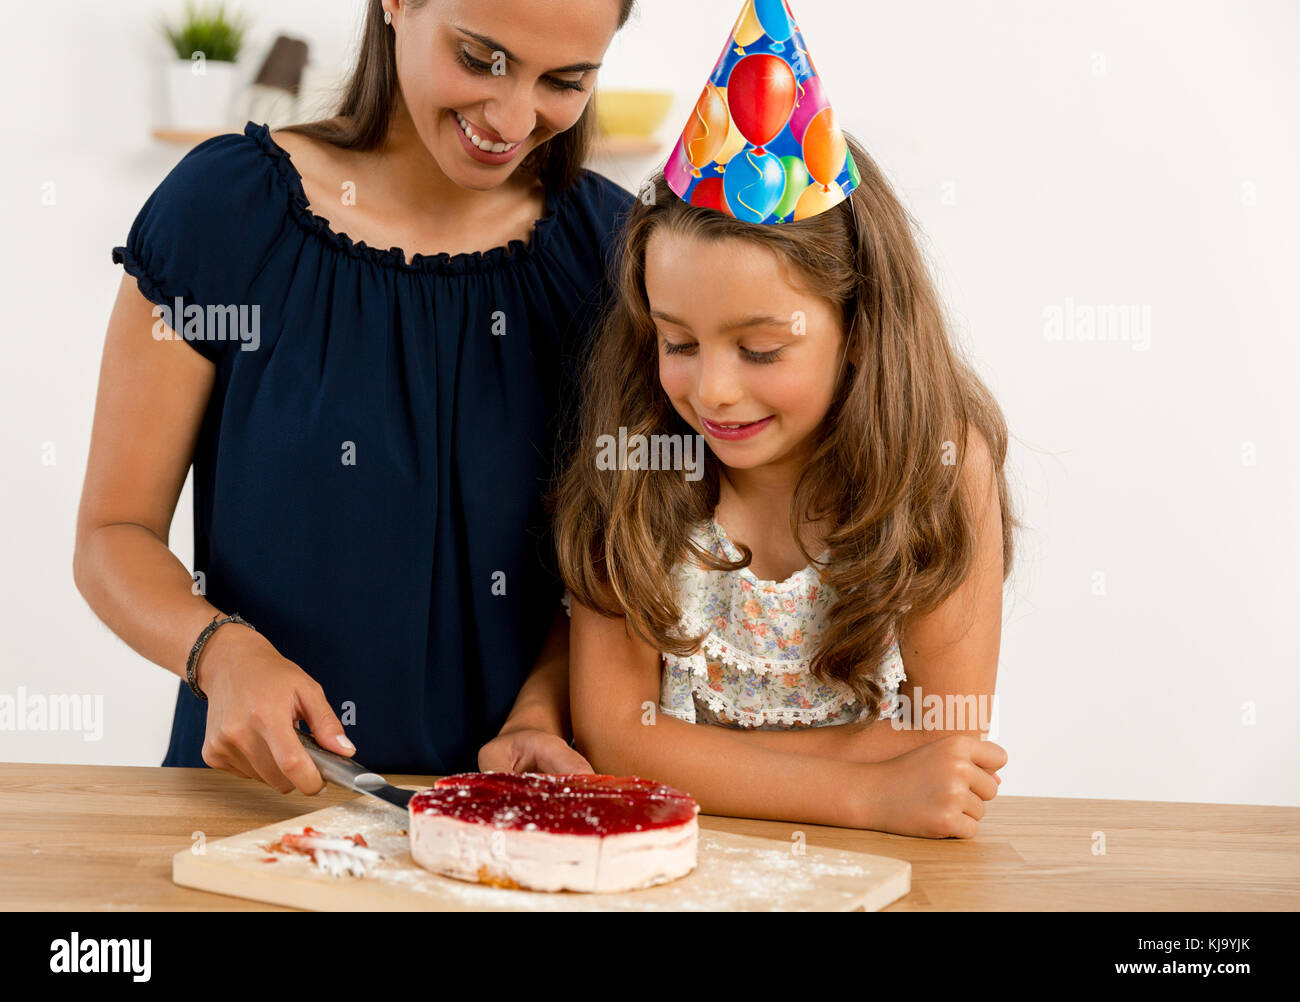 Shot of a mother and daughter cuting the cutting the birthday cake Stock Photo